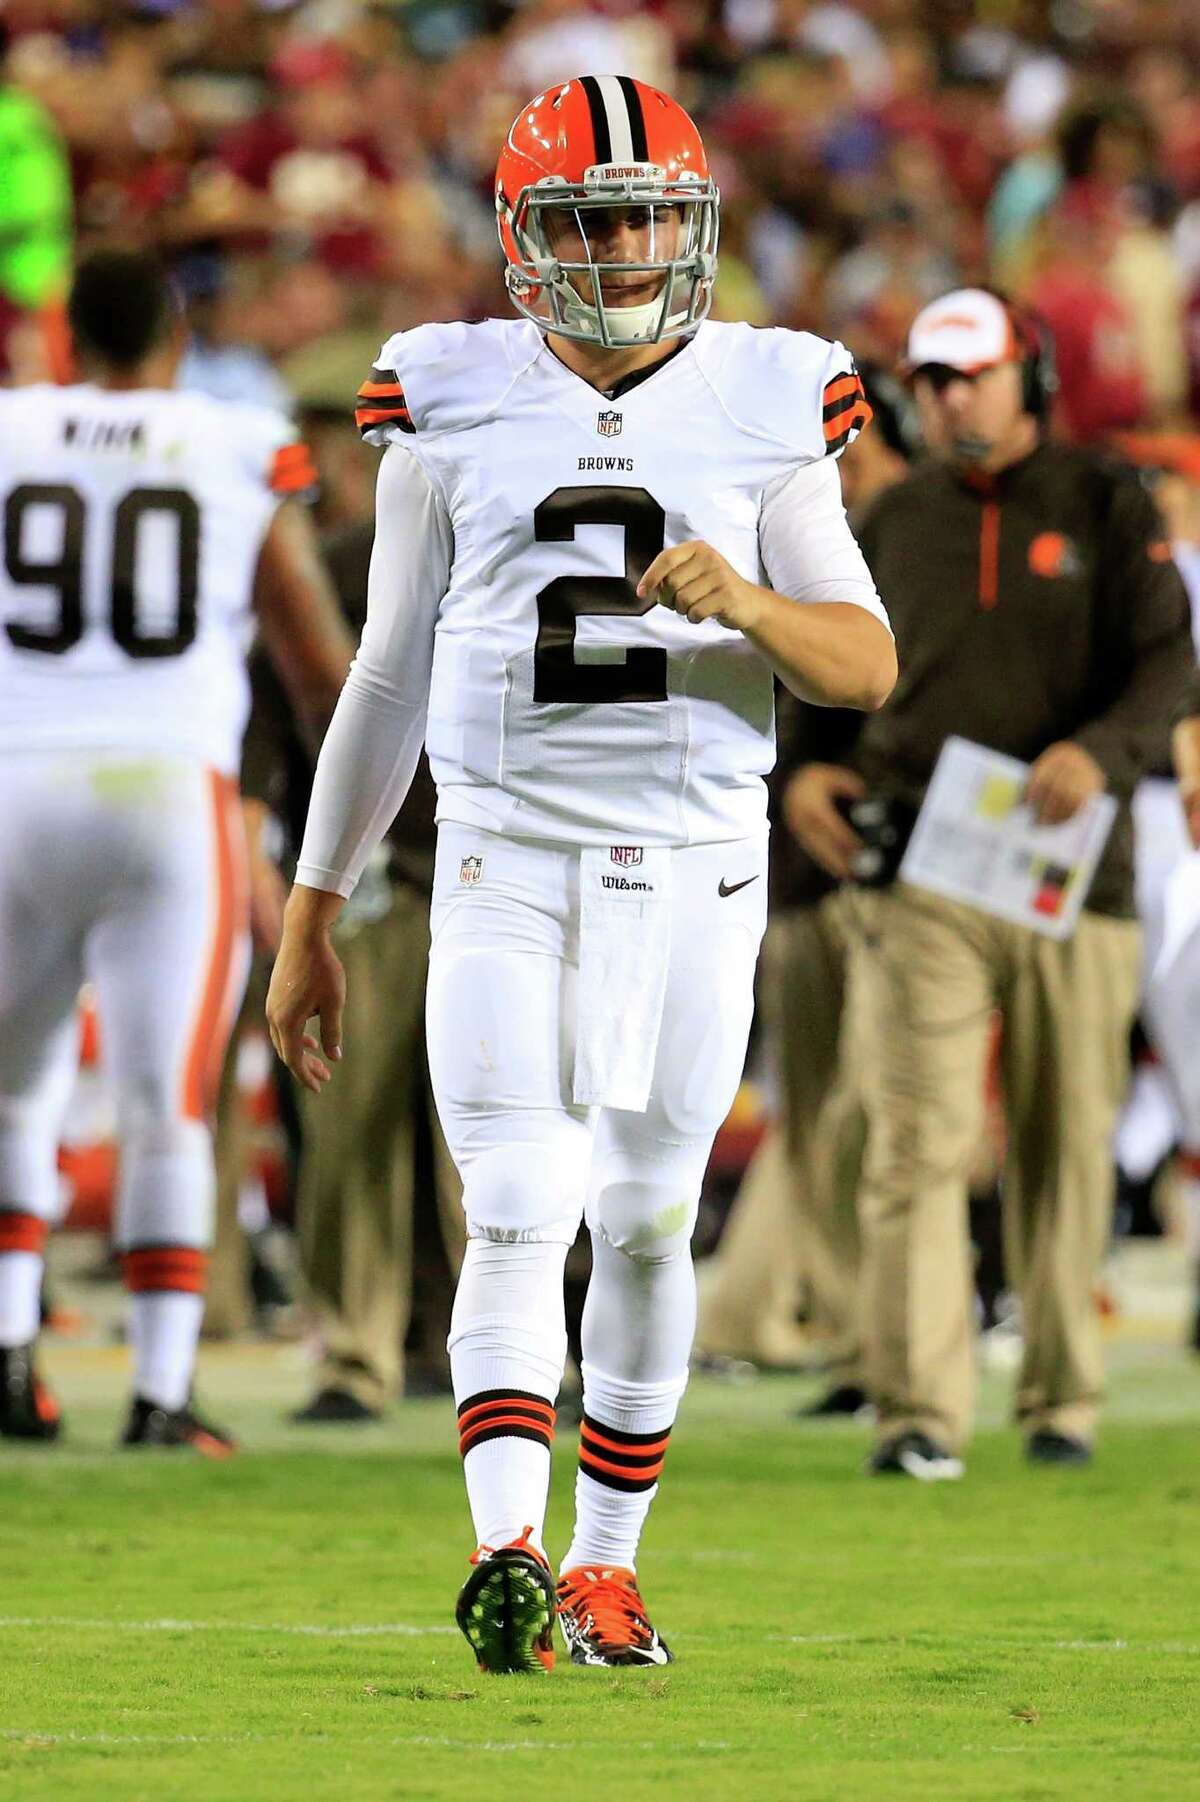 During a preseason game against the Redskins, ESPN cameras caught Manziel making an obscene gesture toward the Washington sideline. He was fined $12,000 by the NFL.